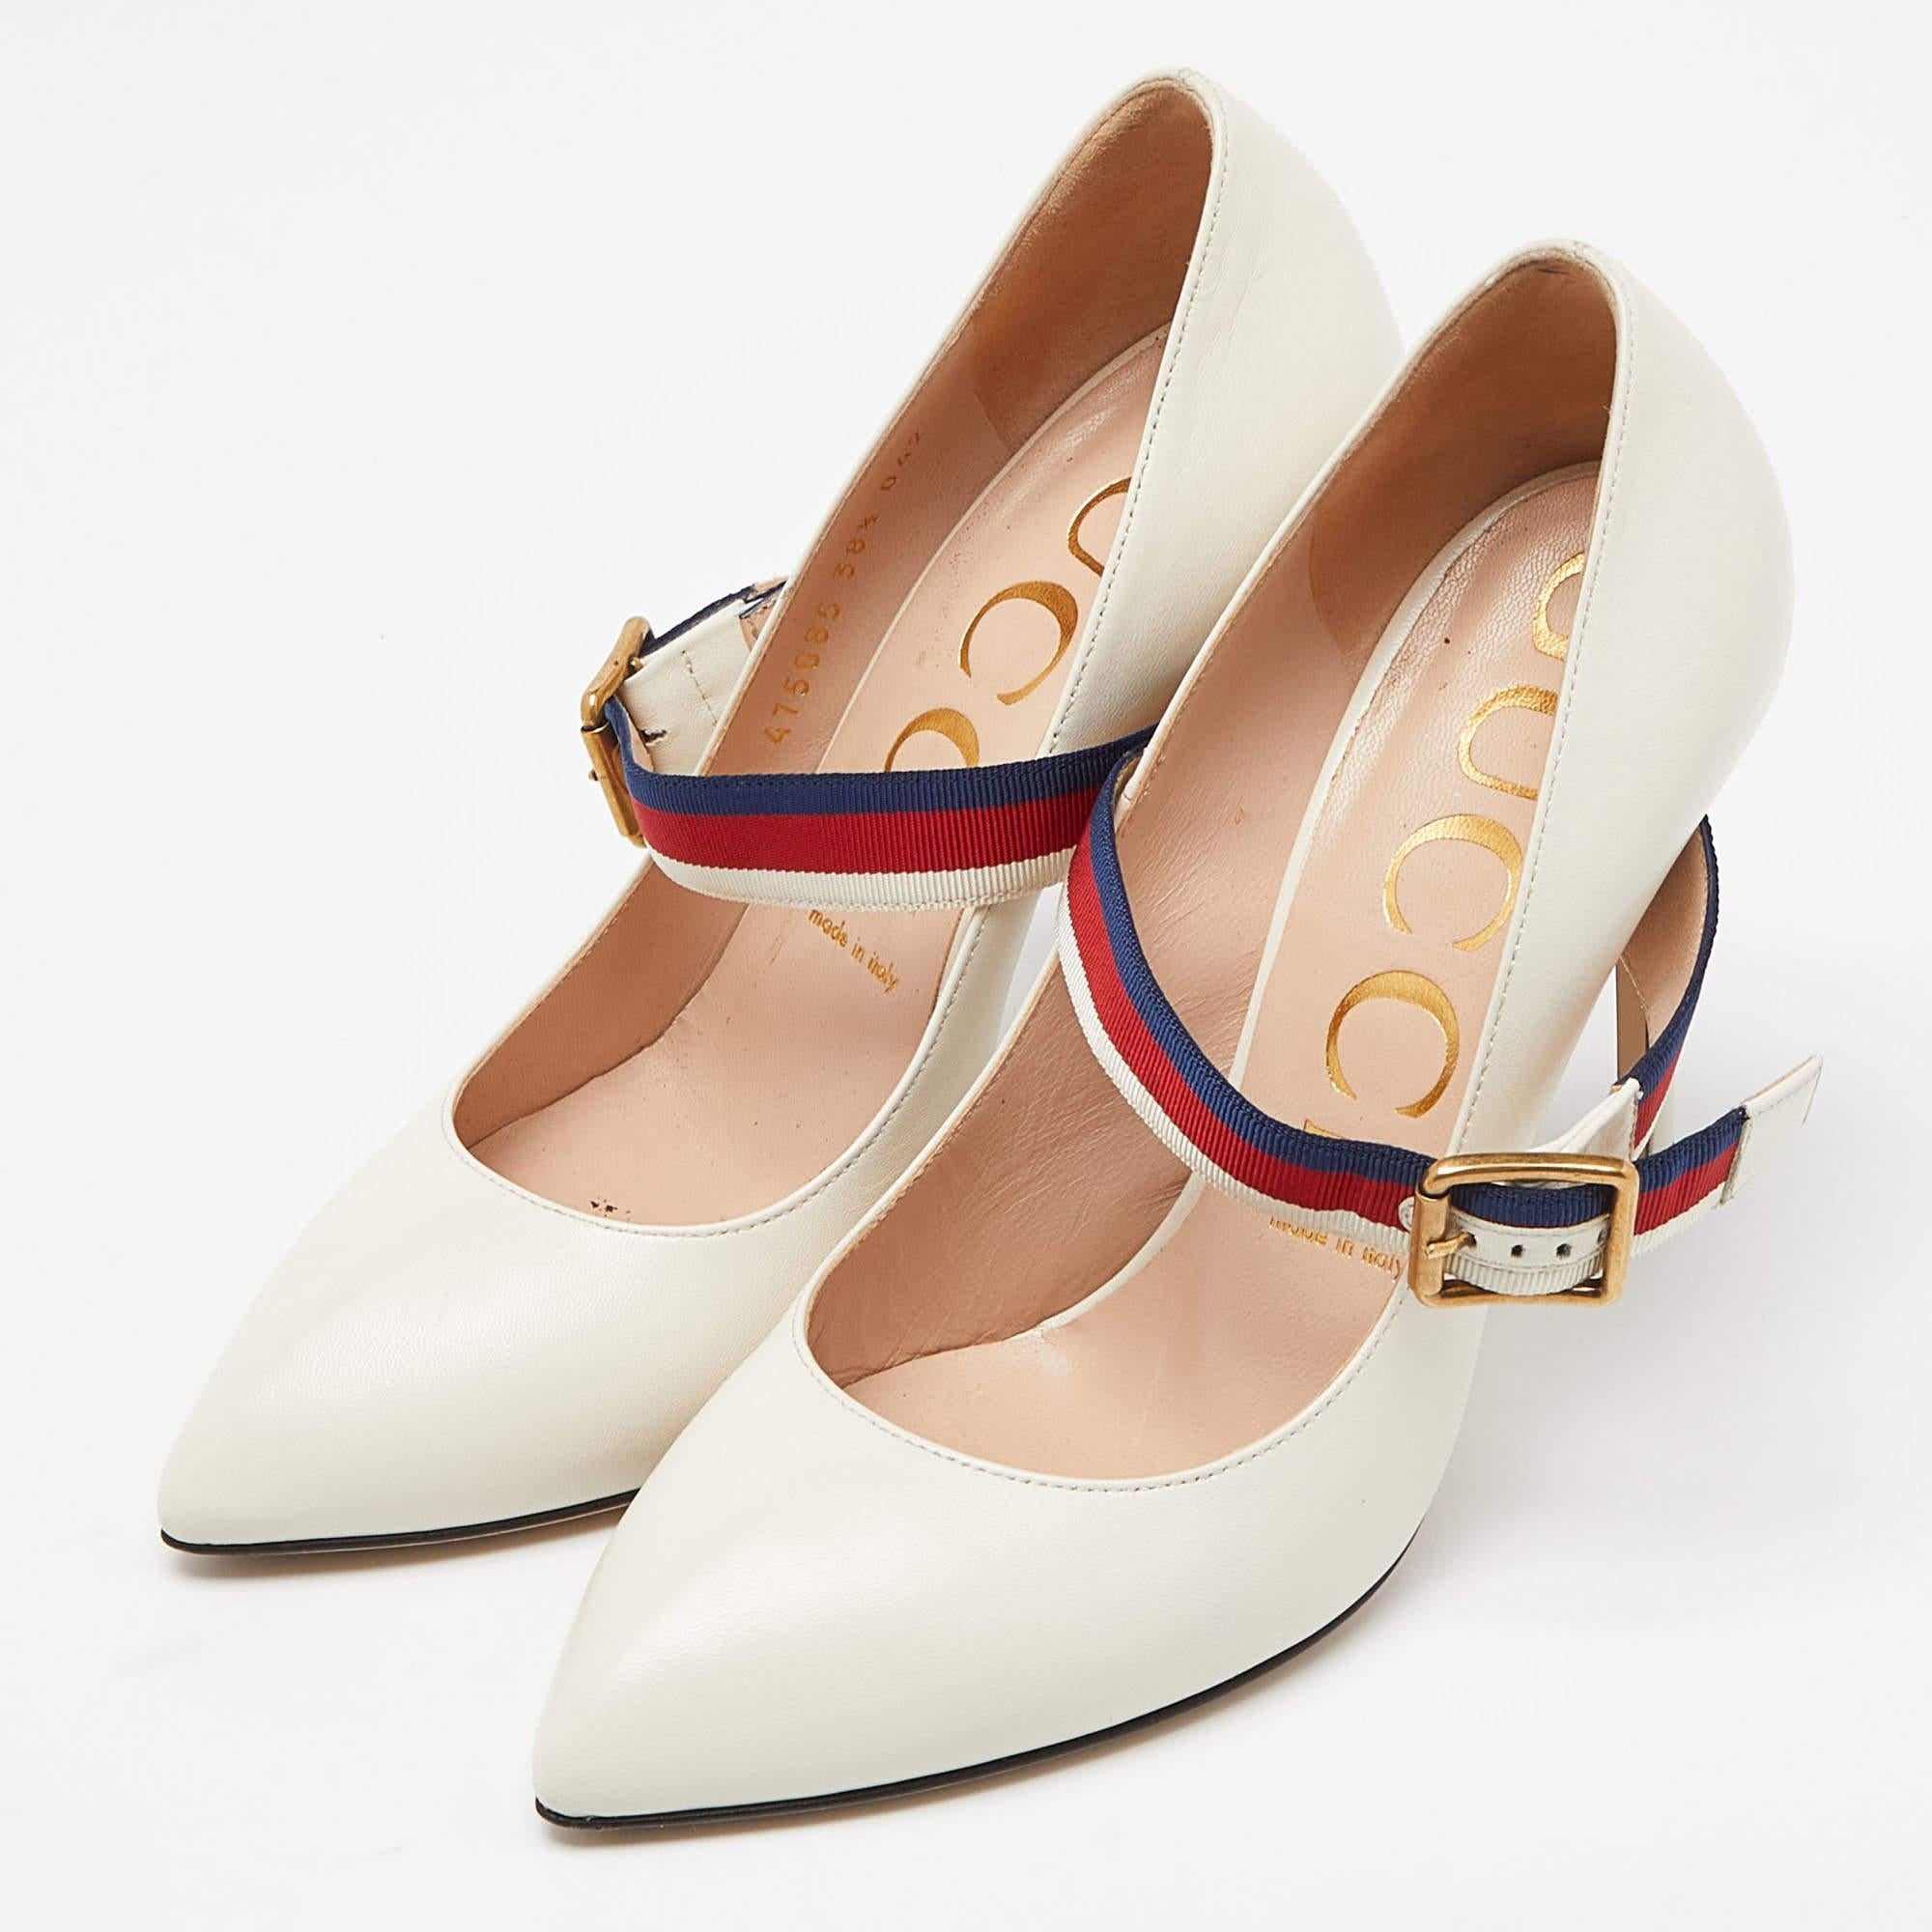 These Gucci Mary Jane Sylvie pumps exude a timeless appeal. Crafted from leather in Italy, they feature a signature strap with buckle fastening, pointed toes, and 11 cm stiletto heels. The white color adds to the appeal of the fashionable